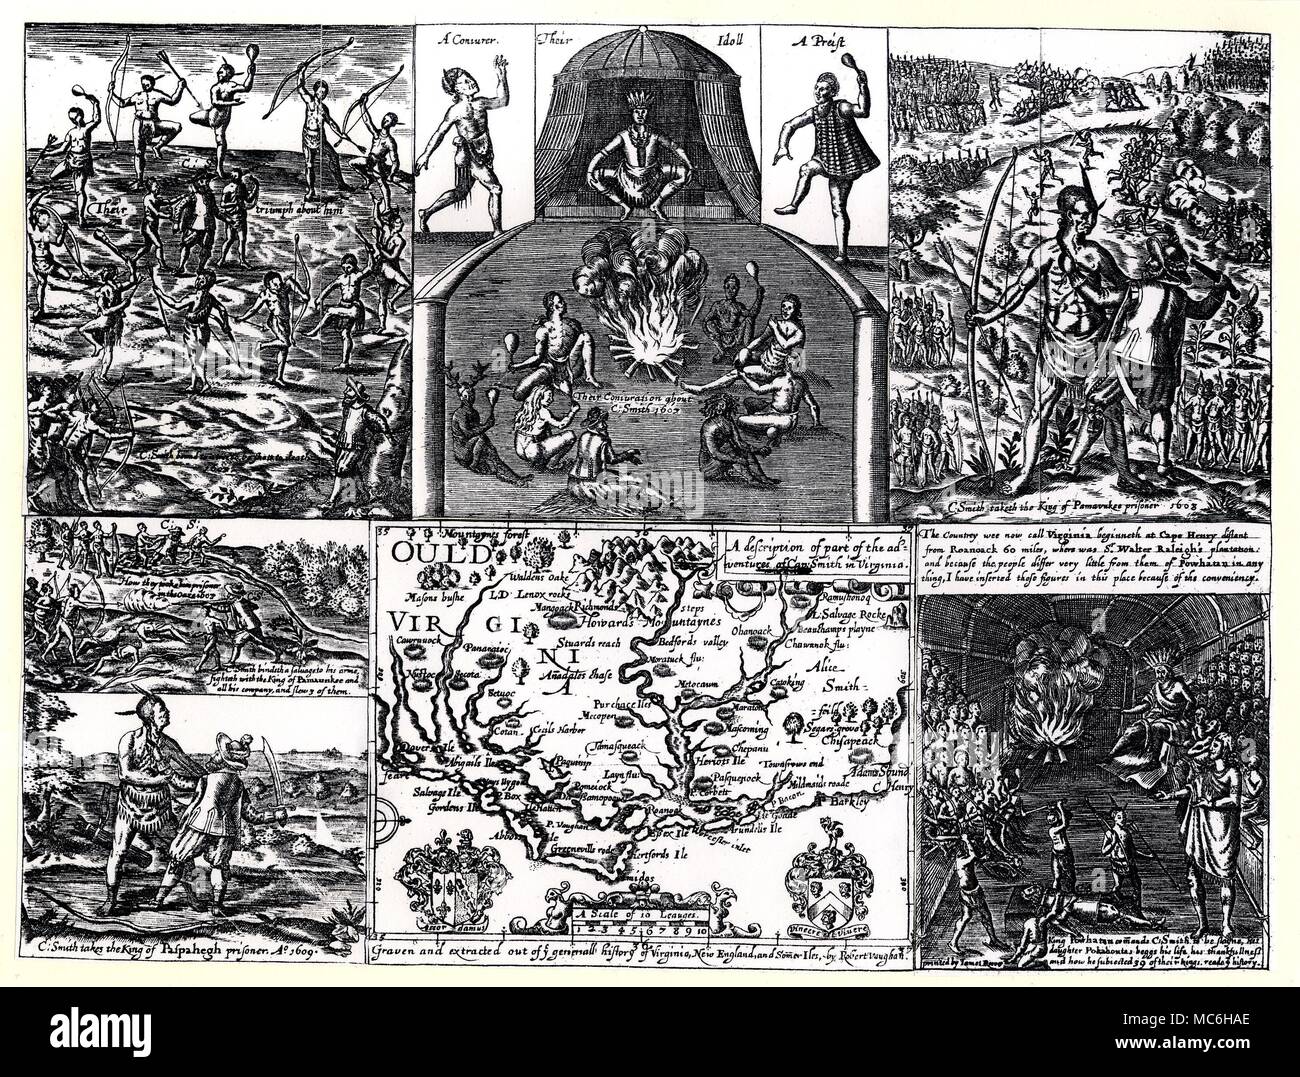 NORTH AMERICAN INDIANS - IDOLS AND MAGICIANS Fold out engraving depicting incidents in the life of the inhabitants of the new-founded Virginia, New England, from Smith's Generall History of Virginia, engraved by Roert Vaughan. Top left, Captain John Smith is captured by Indians, who dance around him. Top centre, a conjurer and priest dance on either side of an Idol, that looks on as a group of magicians practise their conjurations around Smith (an event which occurred in 1602). Top right, Captain Smith captures the Indian King, in 1603. Bottom left - Smith captures the King of Paspahegh, Stock Photo